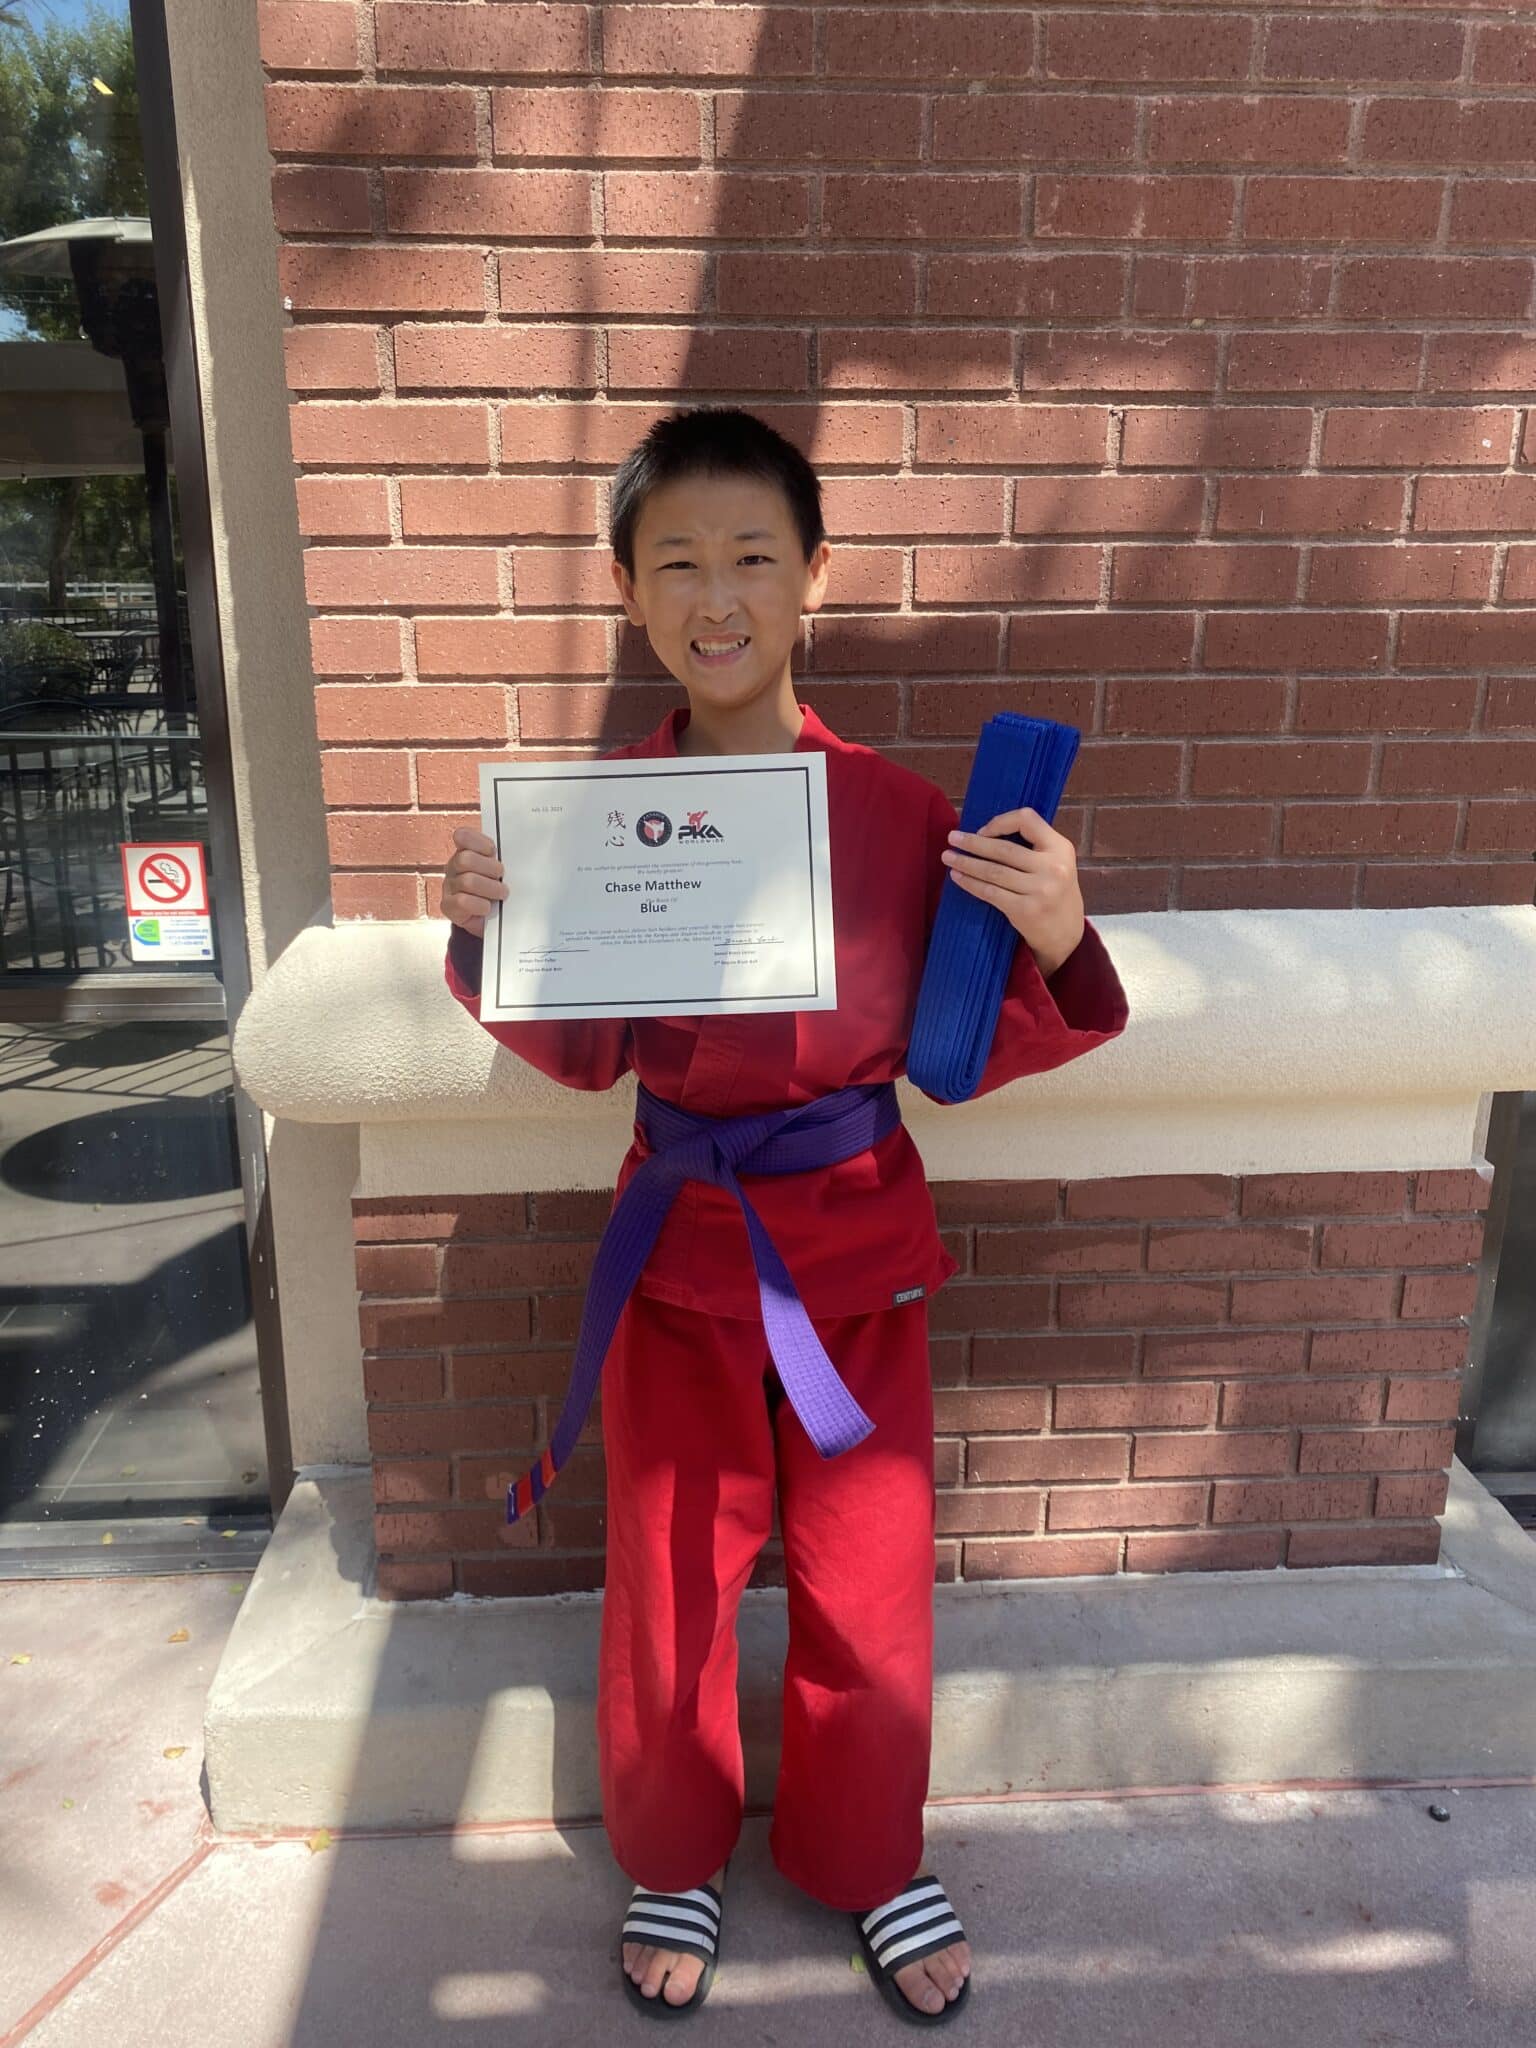 Chase earns his blue belt!  Go Chase!